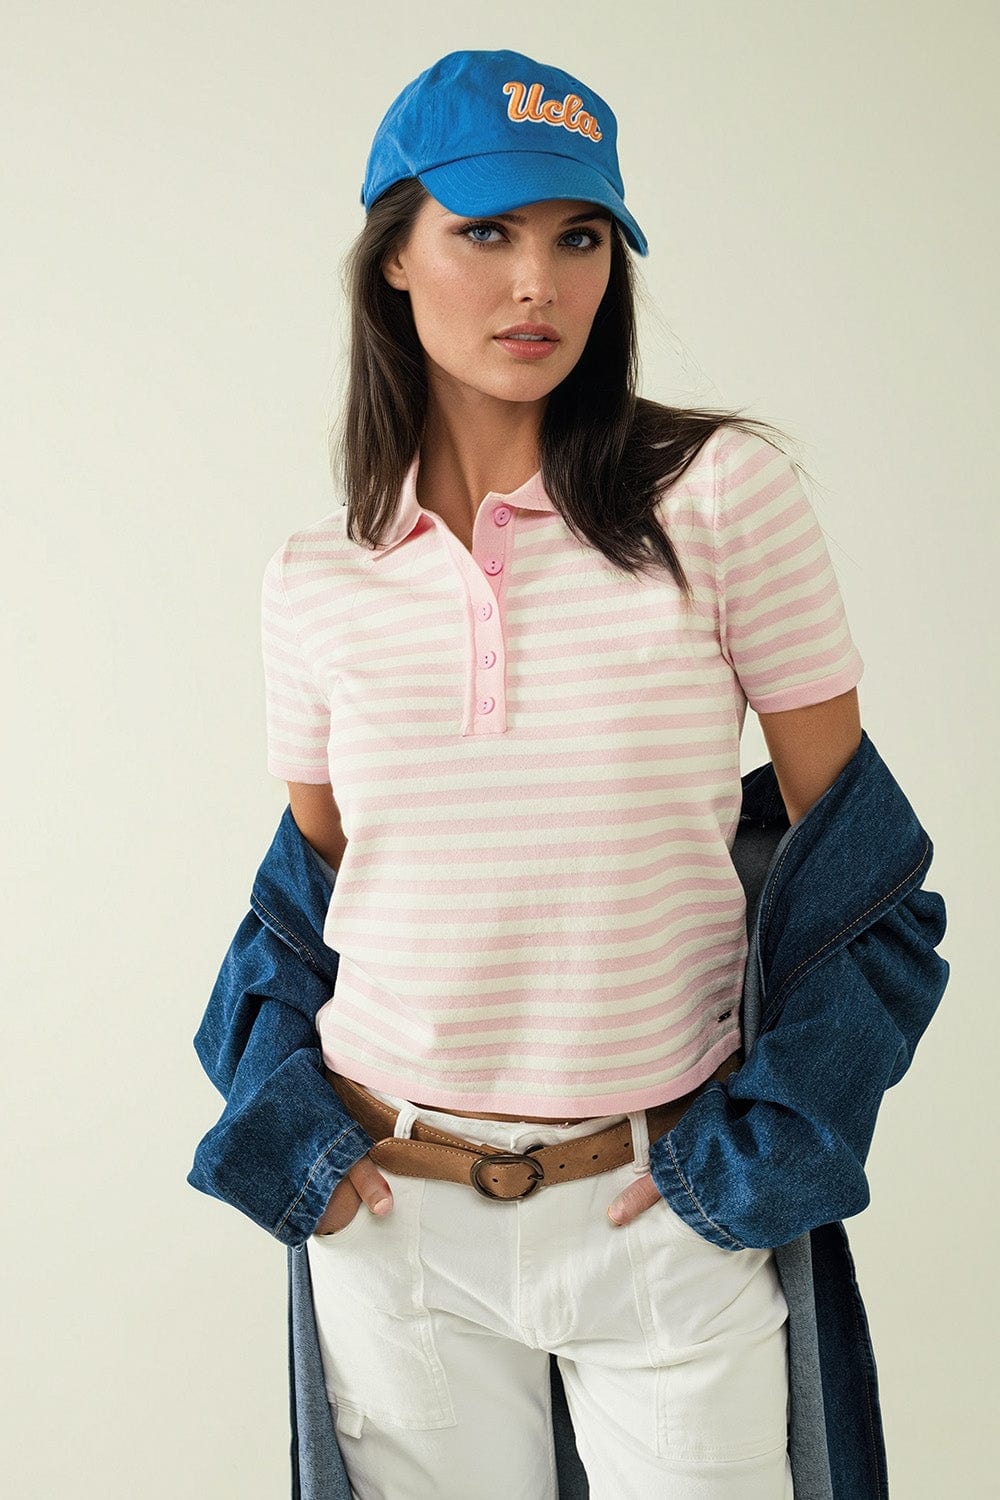 Q2 Women's Sweater White Short Sleeves Polo Shirt With Light Pink Stripes And Frontal Buttons Details